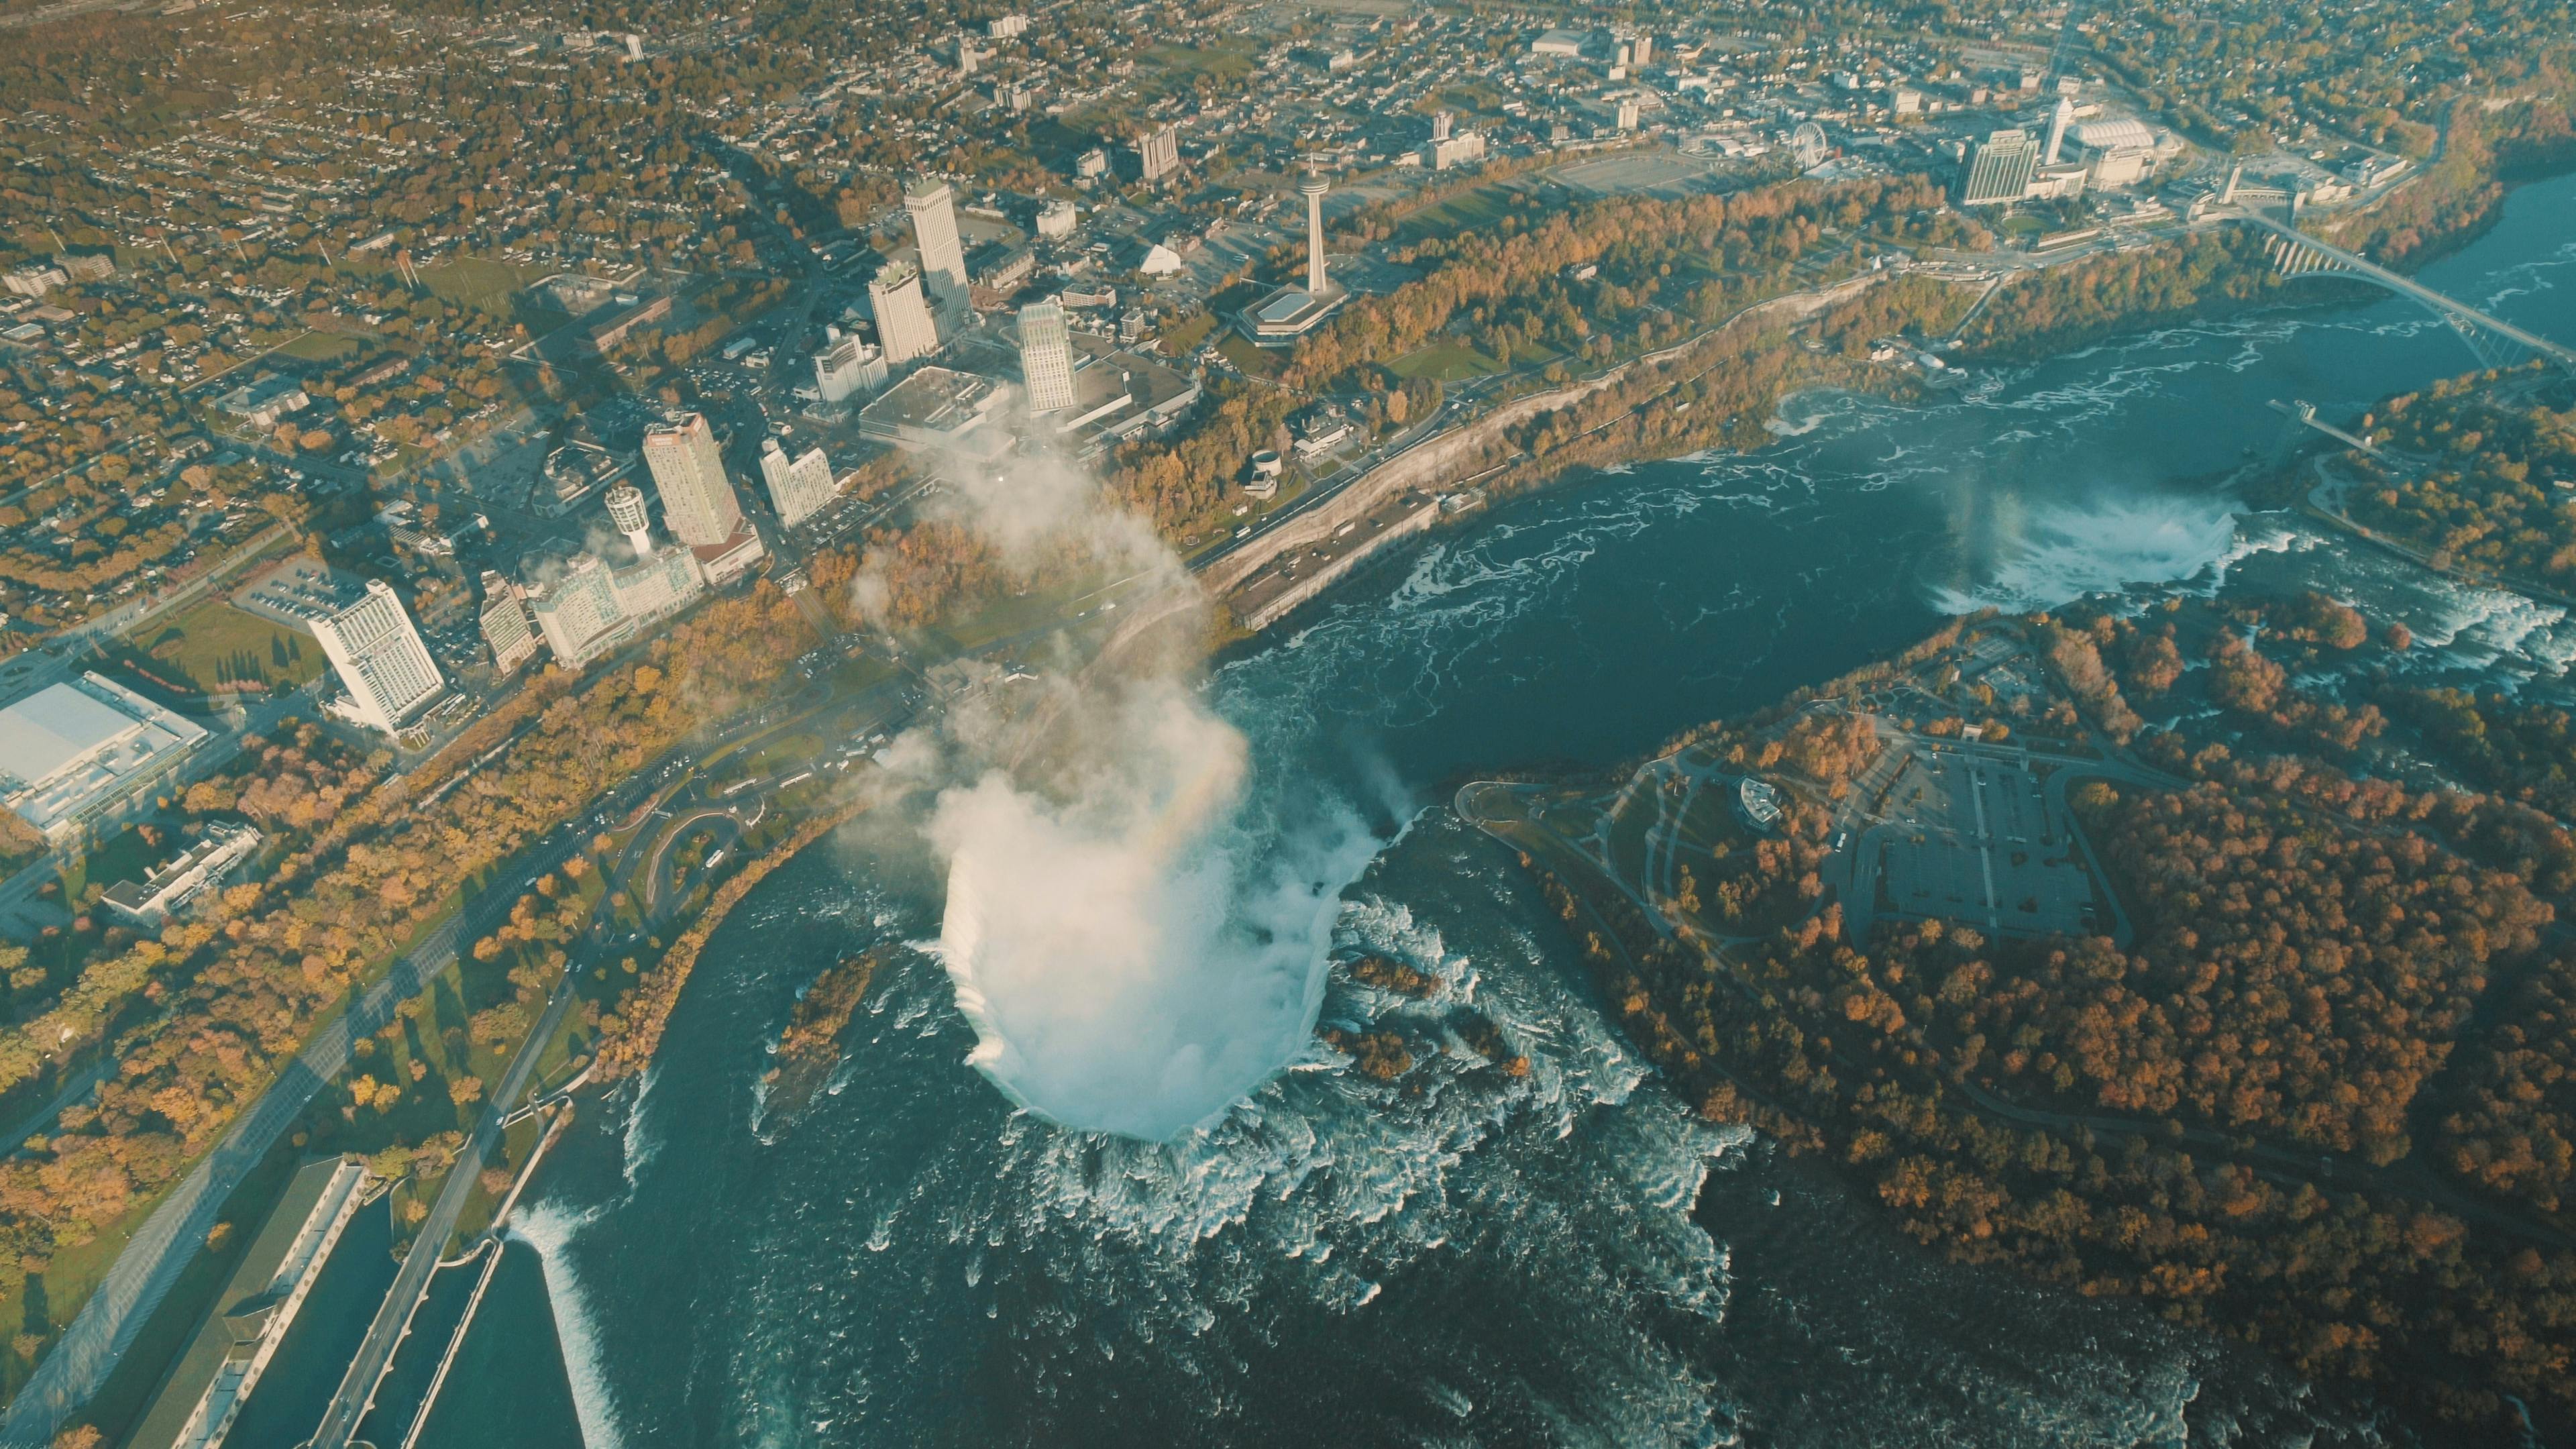 Niagara Falls guided tour with helicopter ride